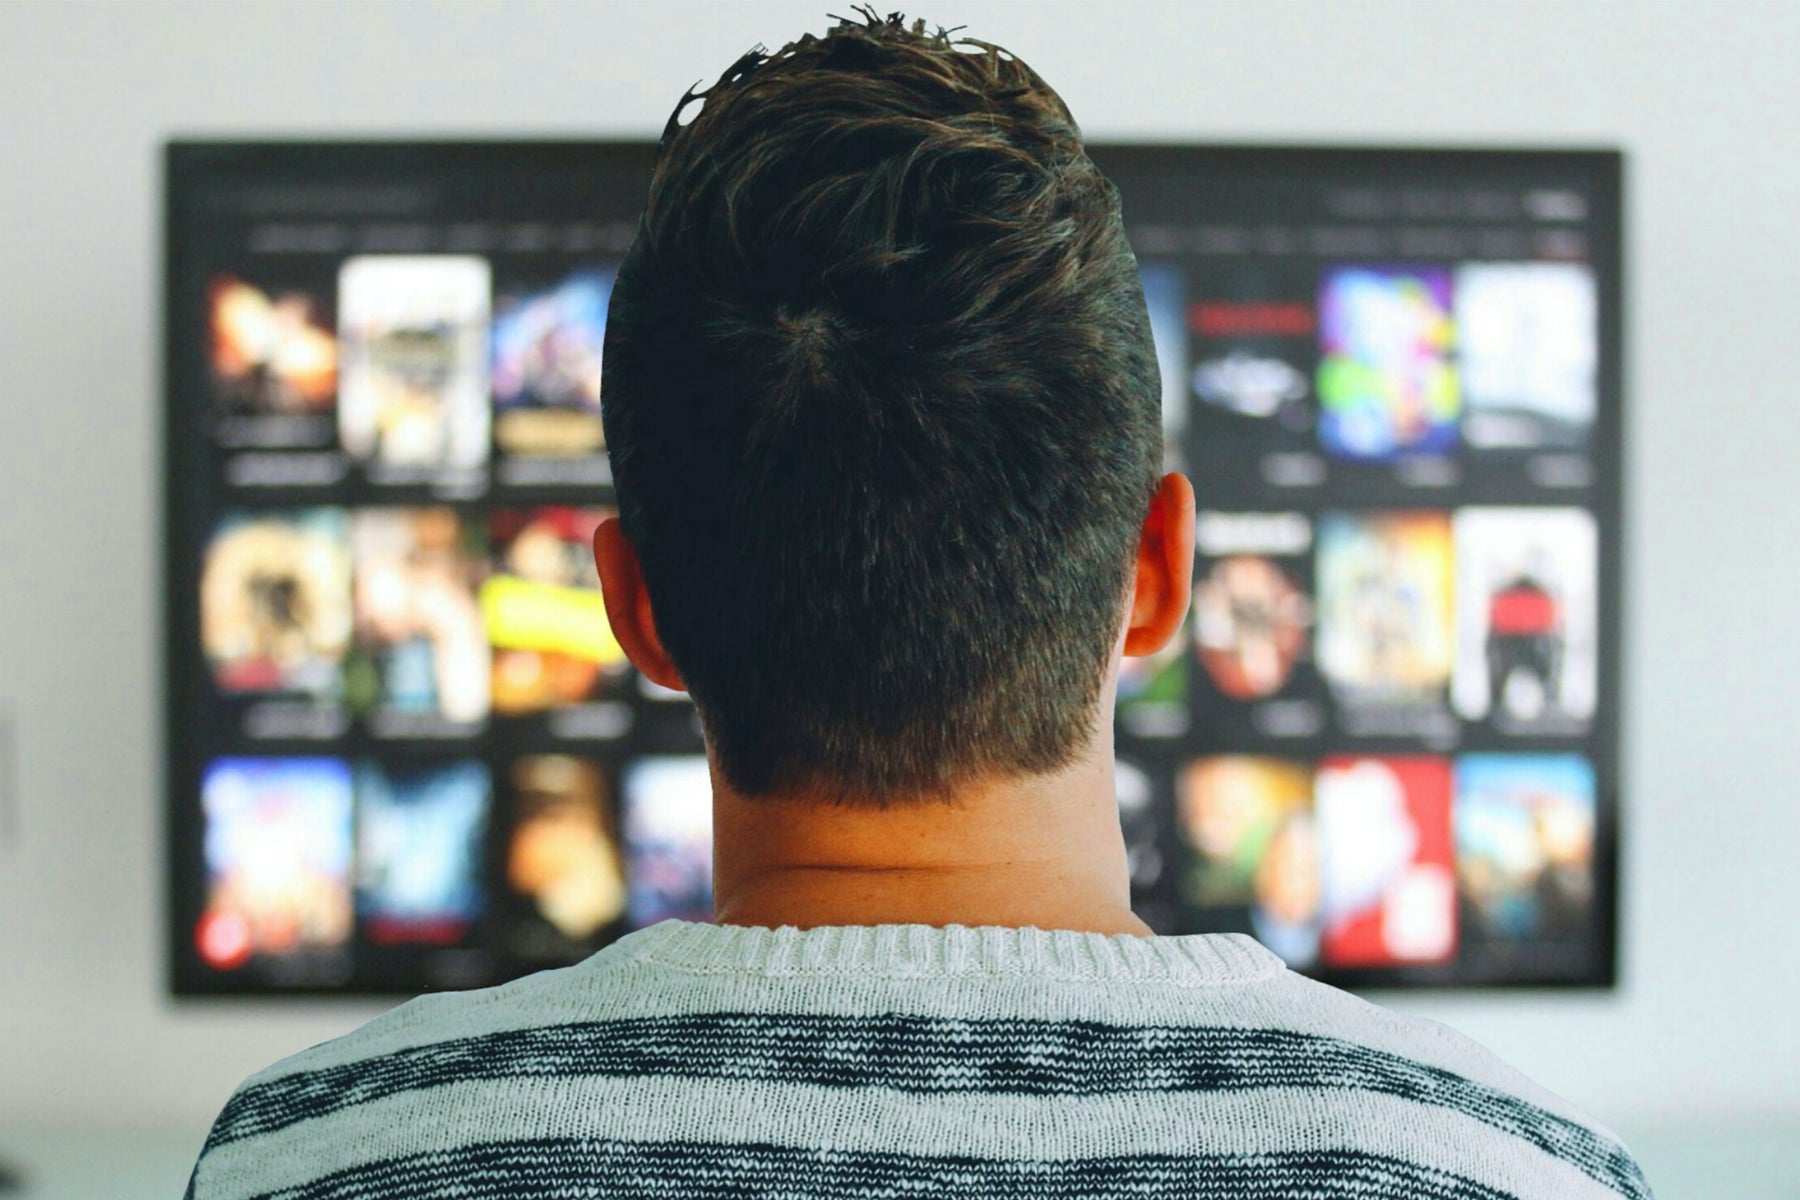 man watching TV with streaming services on the screen